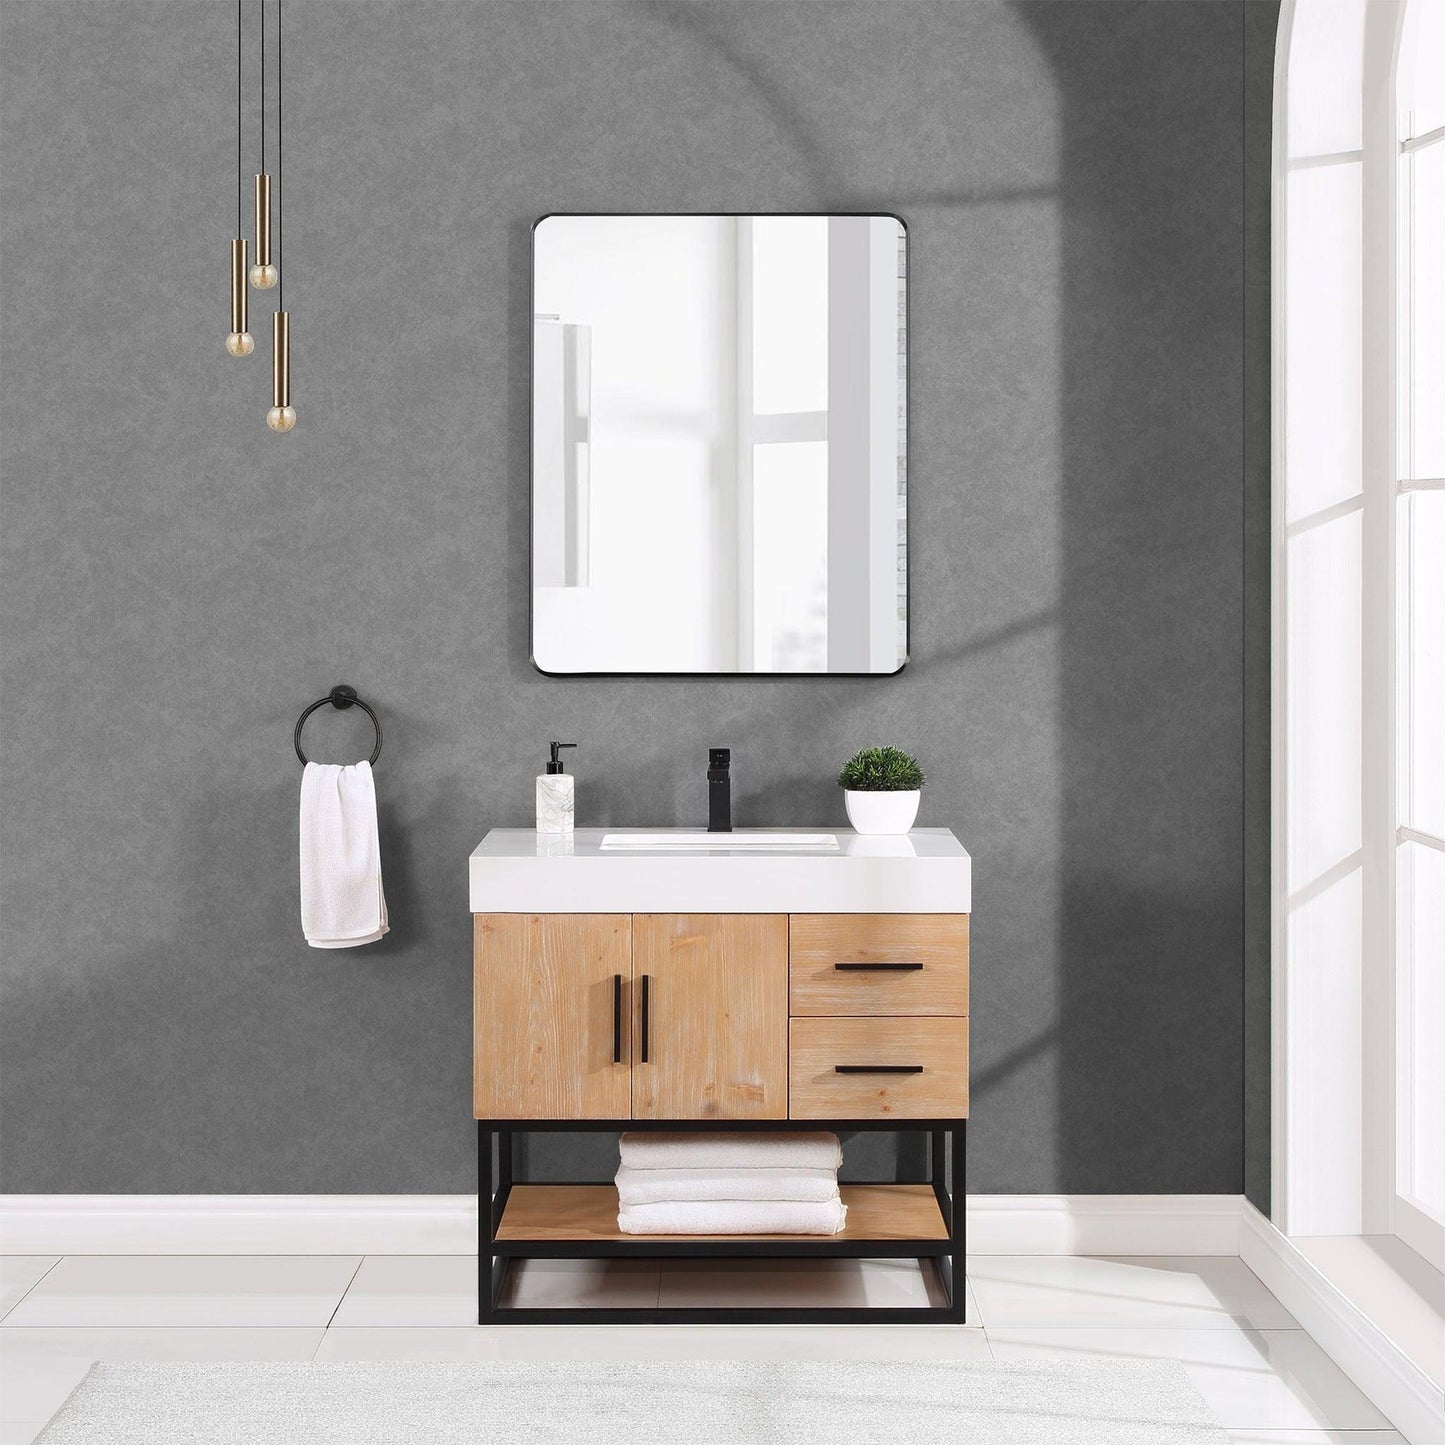 Altair Bianco 36" Light Brown Freestanding Single Bathroom Vanity Set With Matte Black Support Base, Mirror, White Composite Stone Top, Single Rectangular Undermount Ceramic Sink, and Overflow